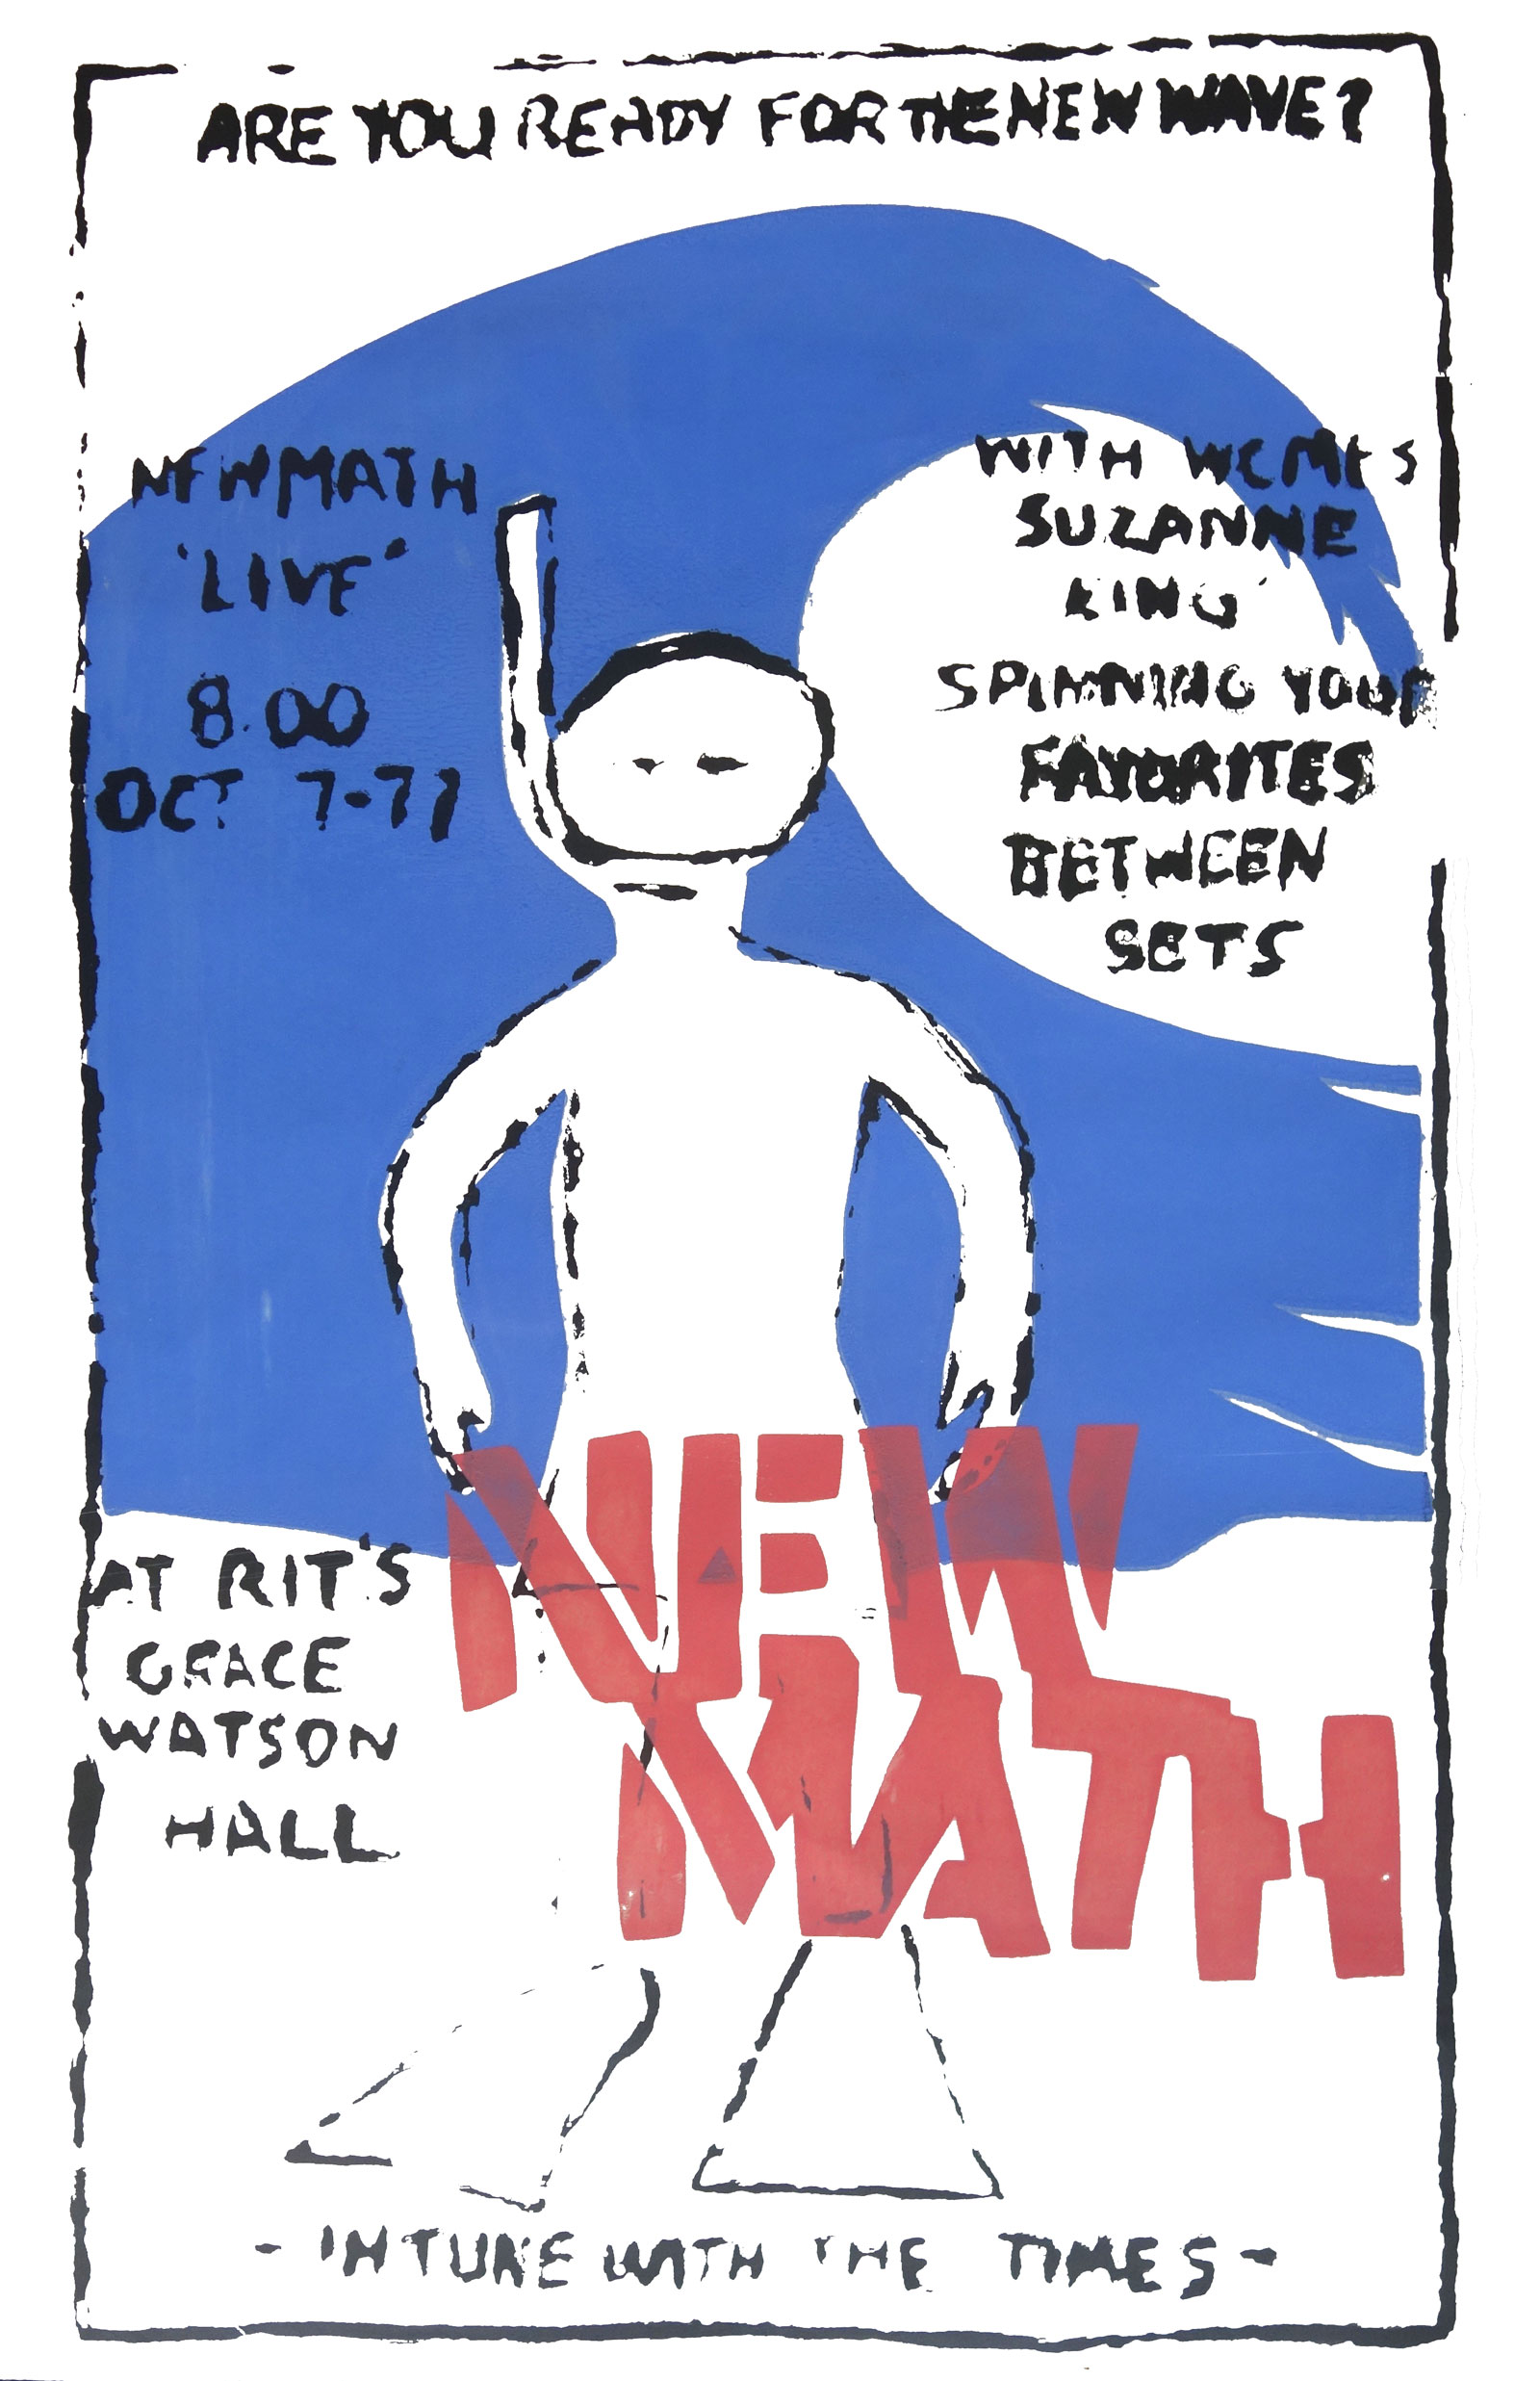 3 color silkscreen poster for New Math gig at R.I.T Grace Watson Hall on October 7, 1977